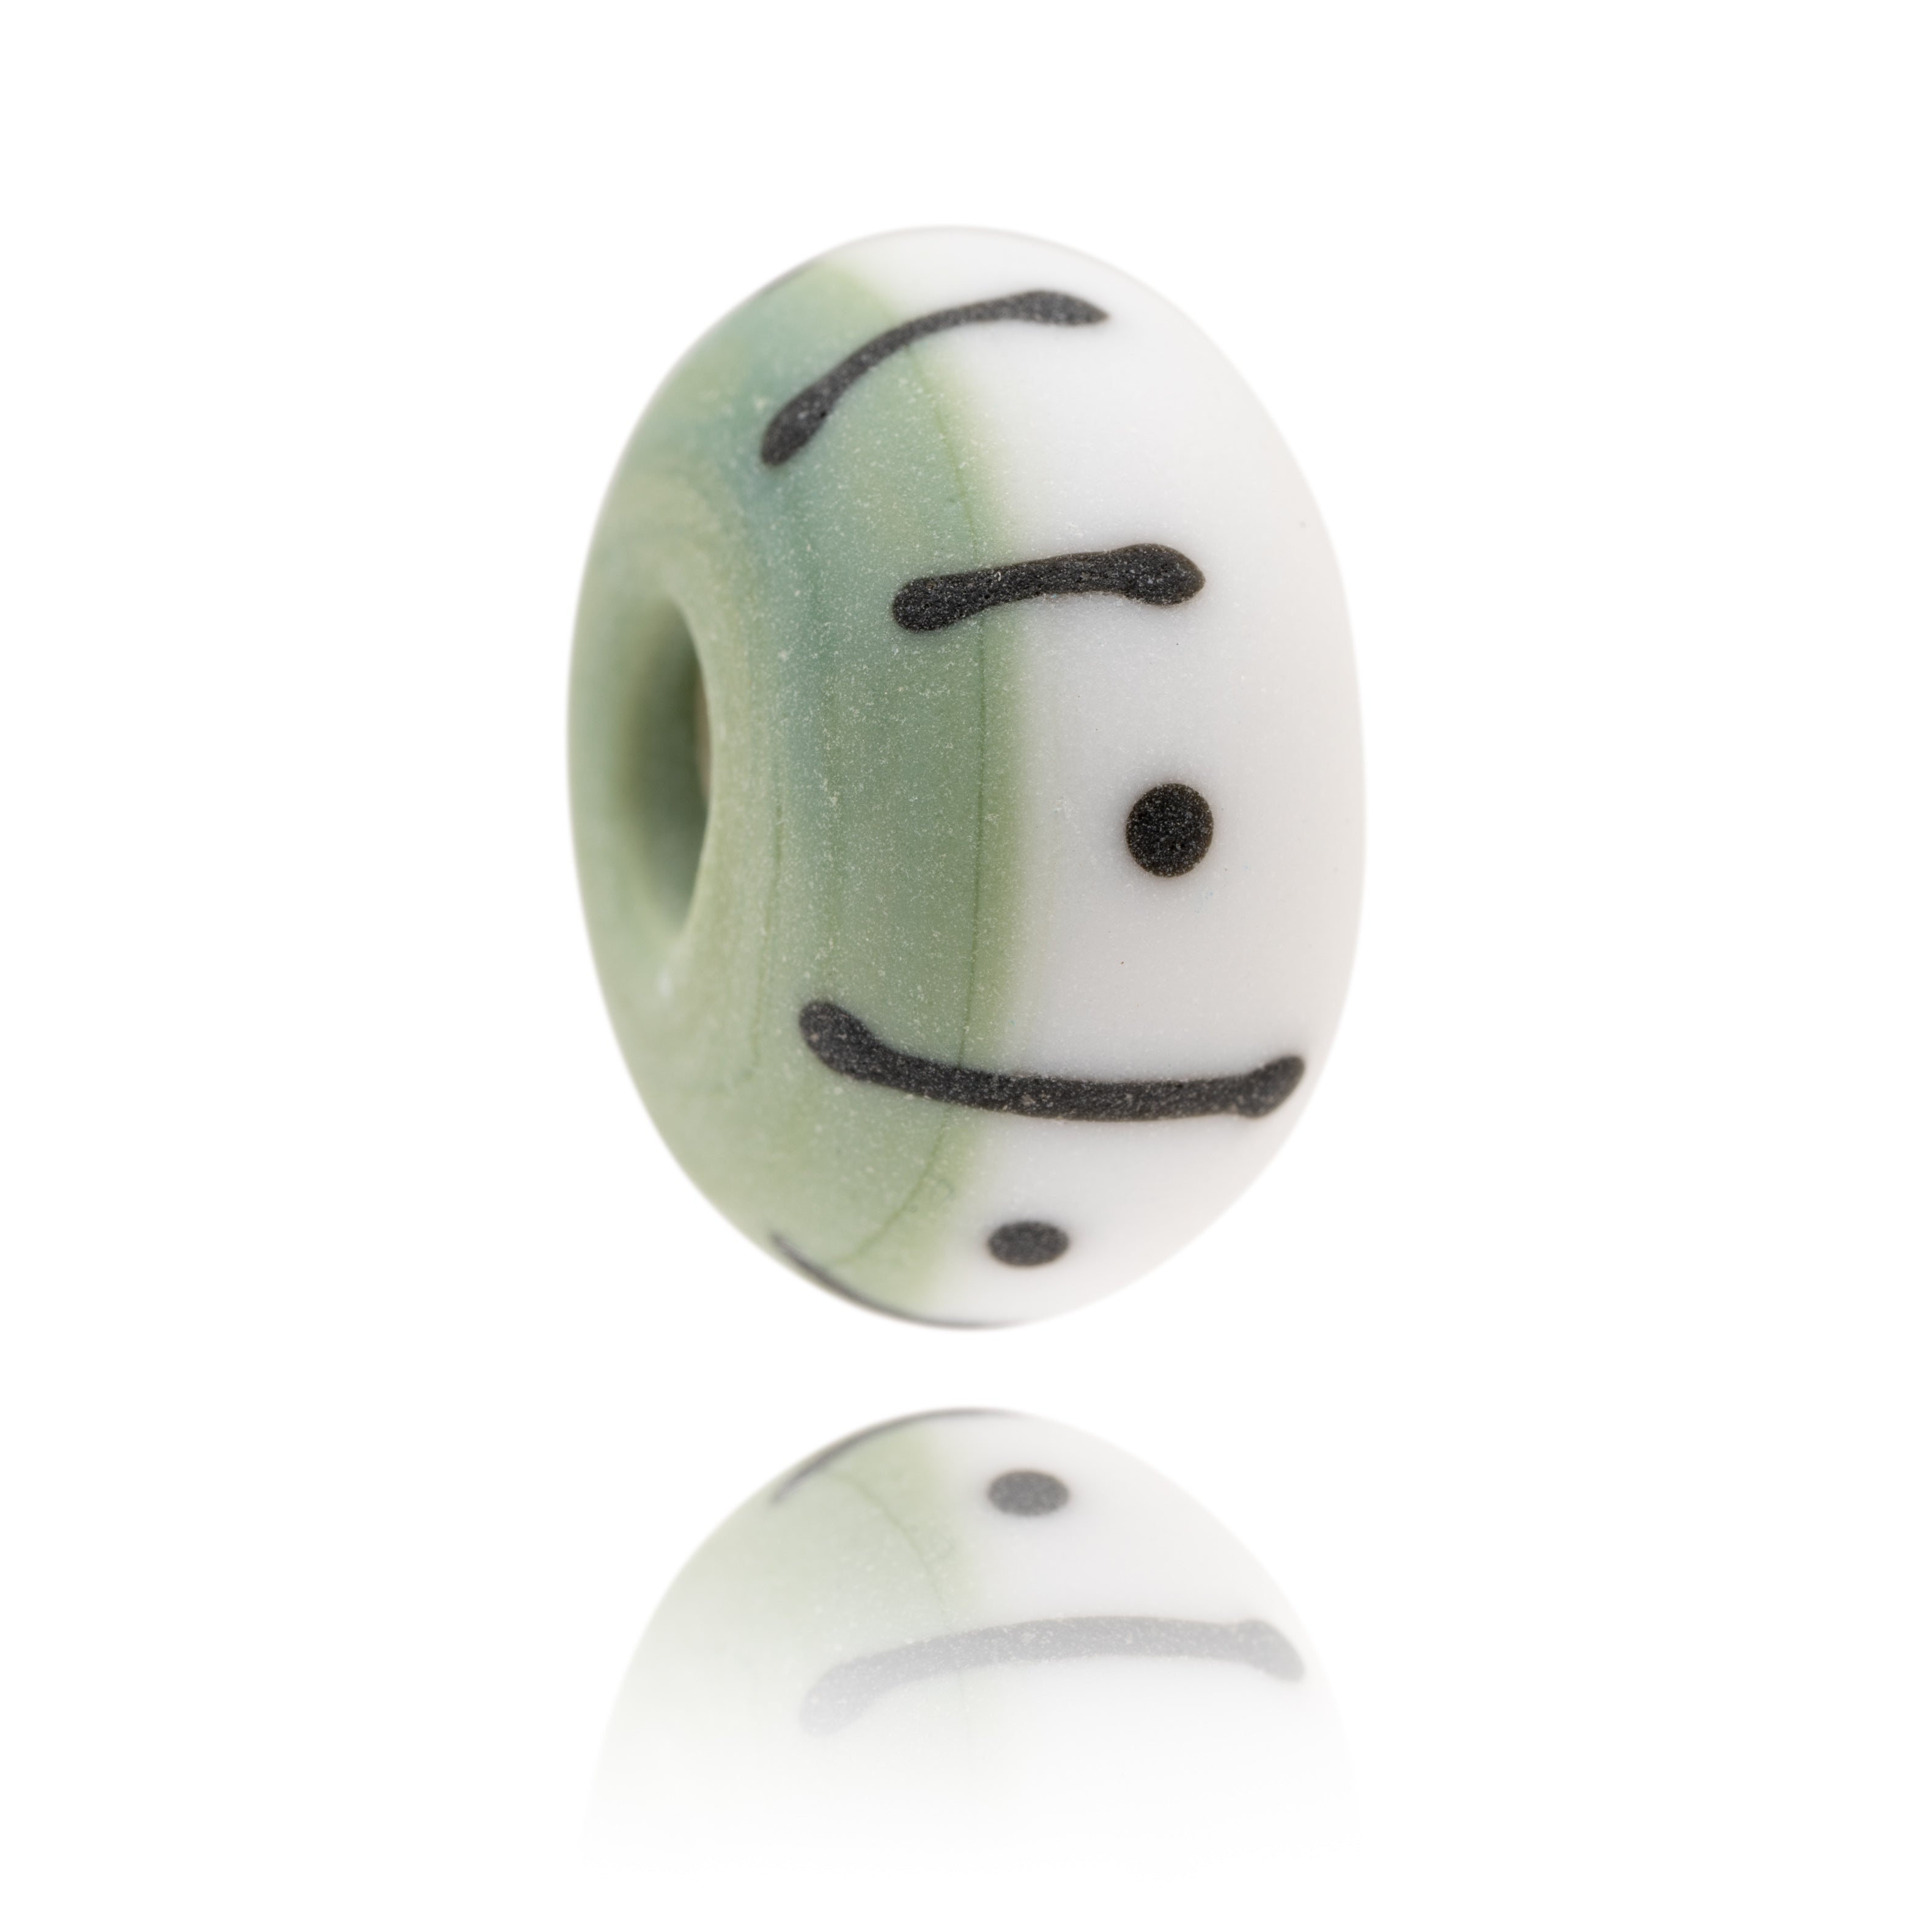 Green and white Murano glass bead decorated with black dots and stripes, representing Eastbourne Beach in Sussex.